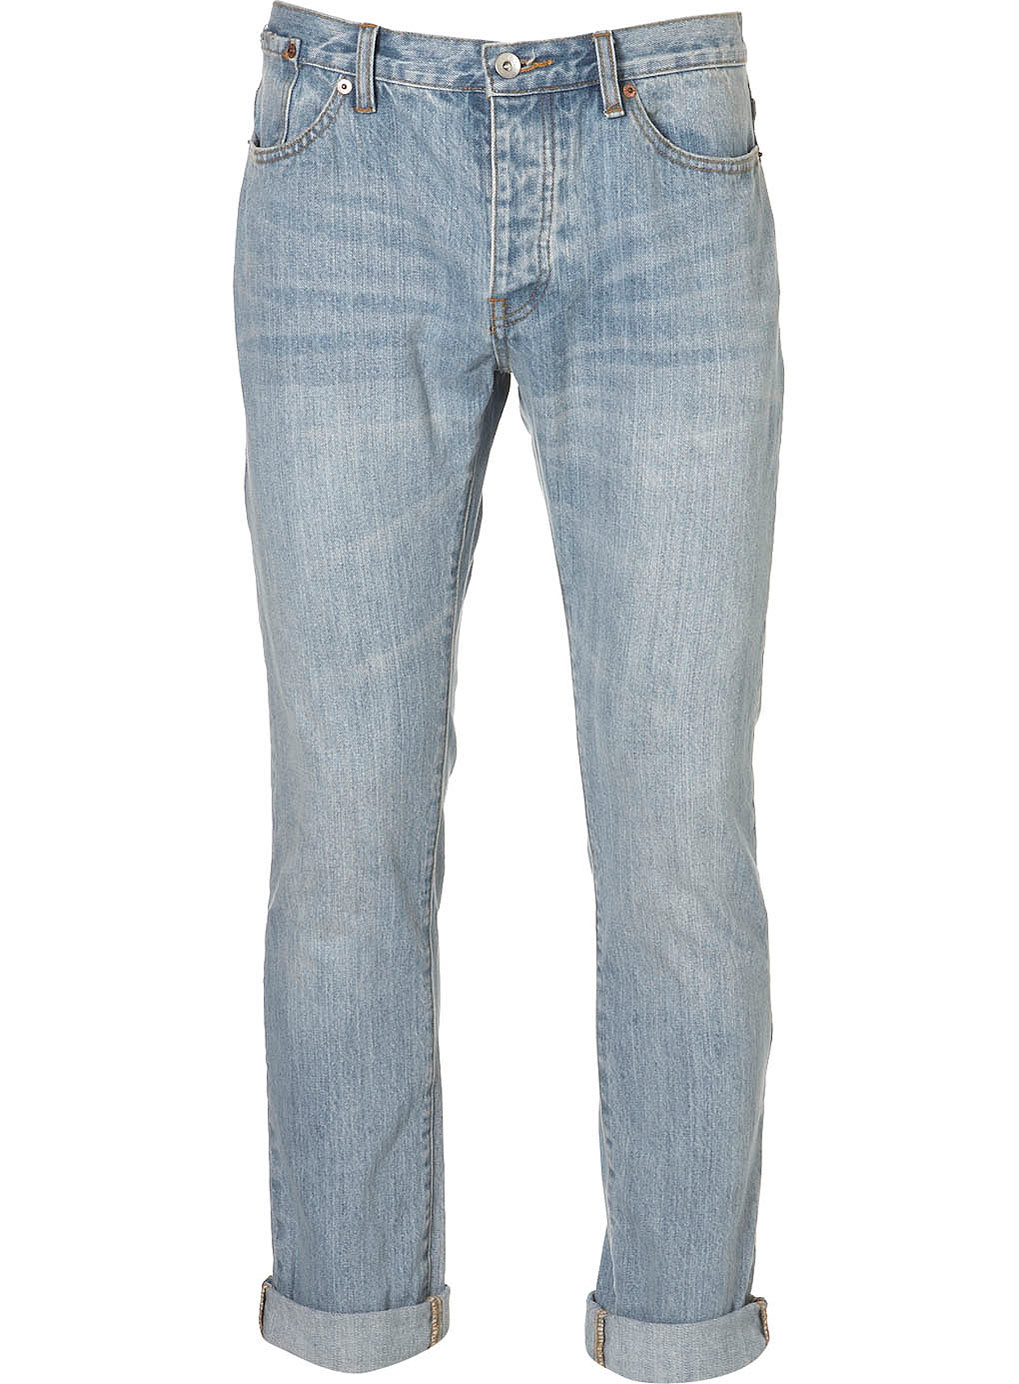 Top 10 Stuffs: Top 10 Most Stylish Jeans For Men